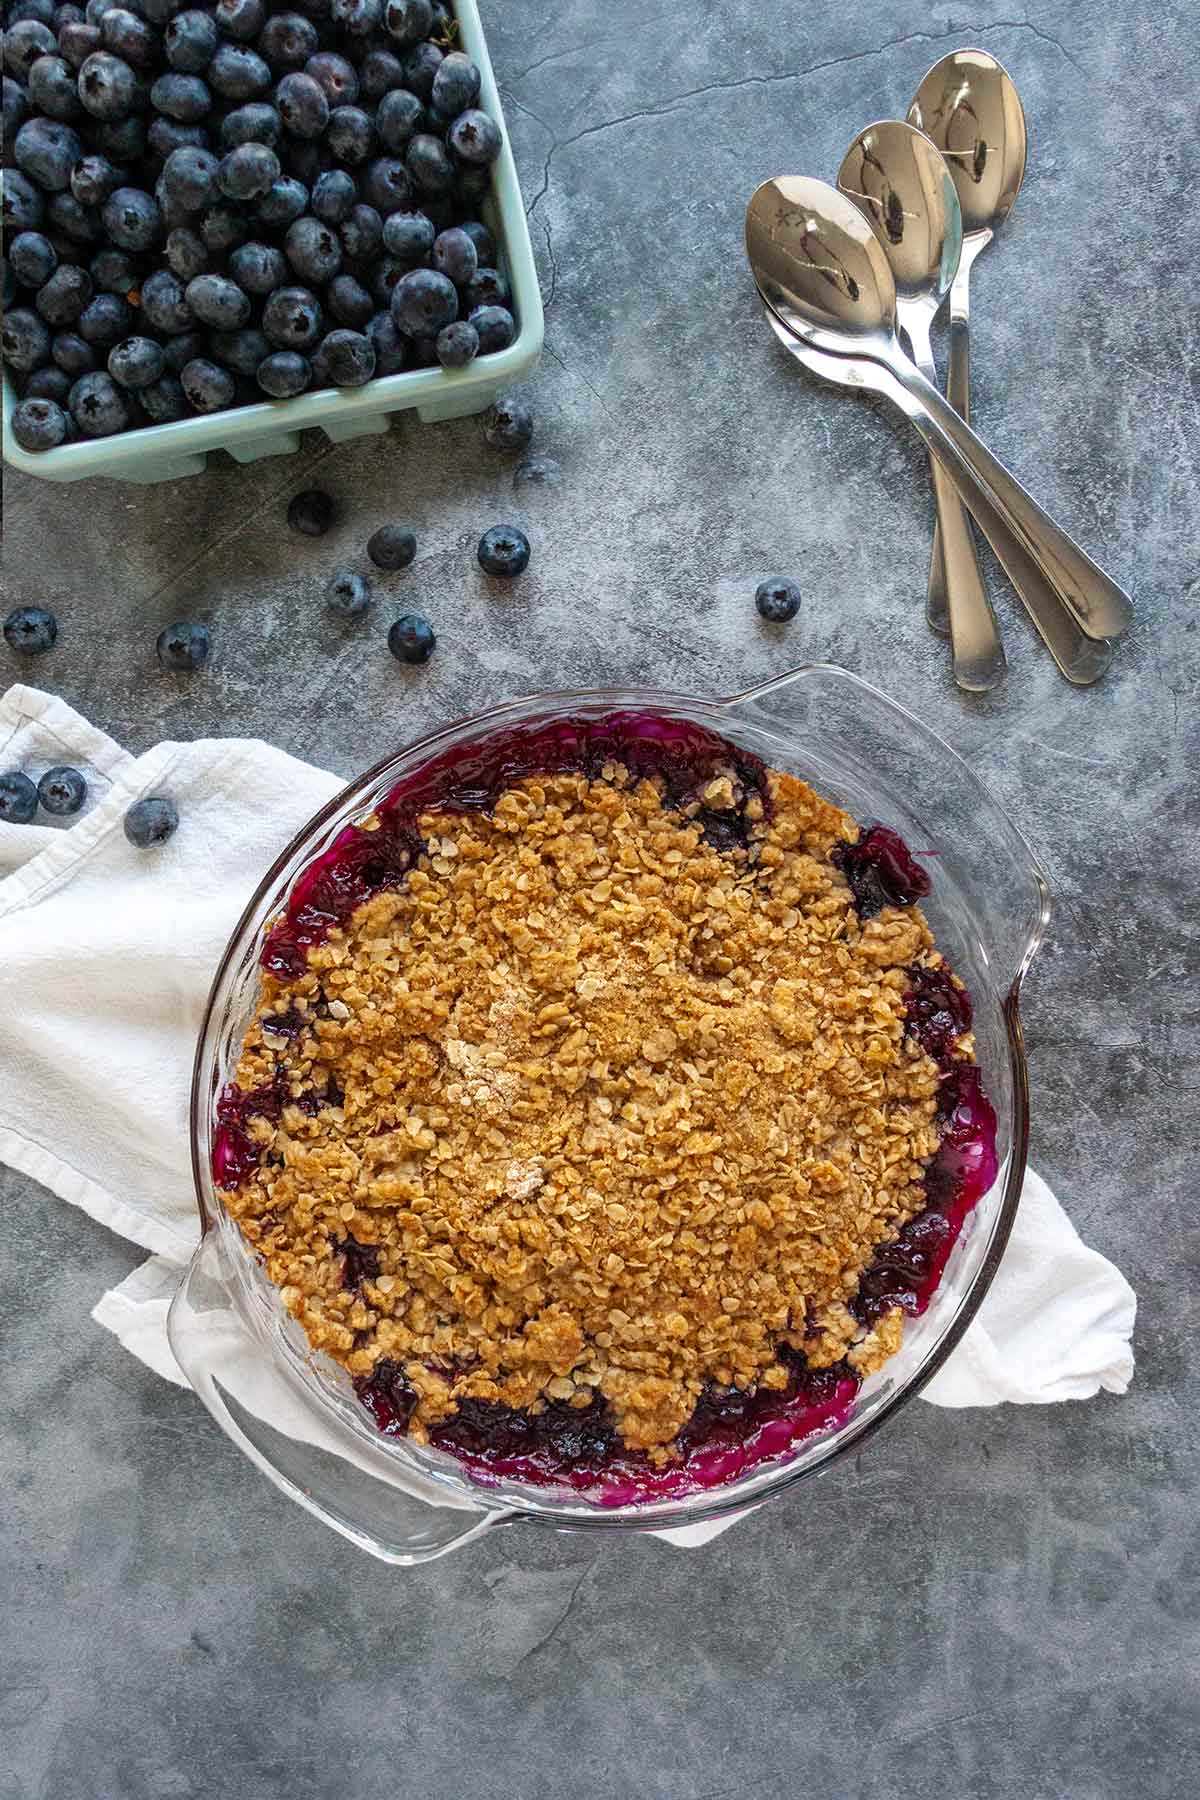 A blueberry crumble in a glass pie dish with a basked of blueberries and several spoons next to it.